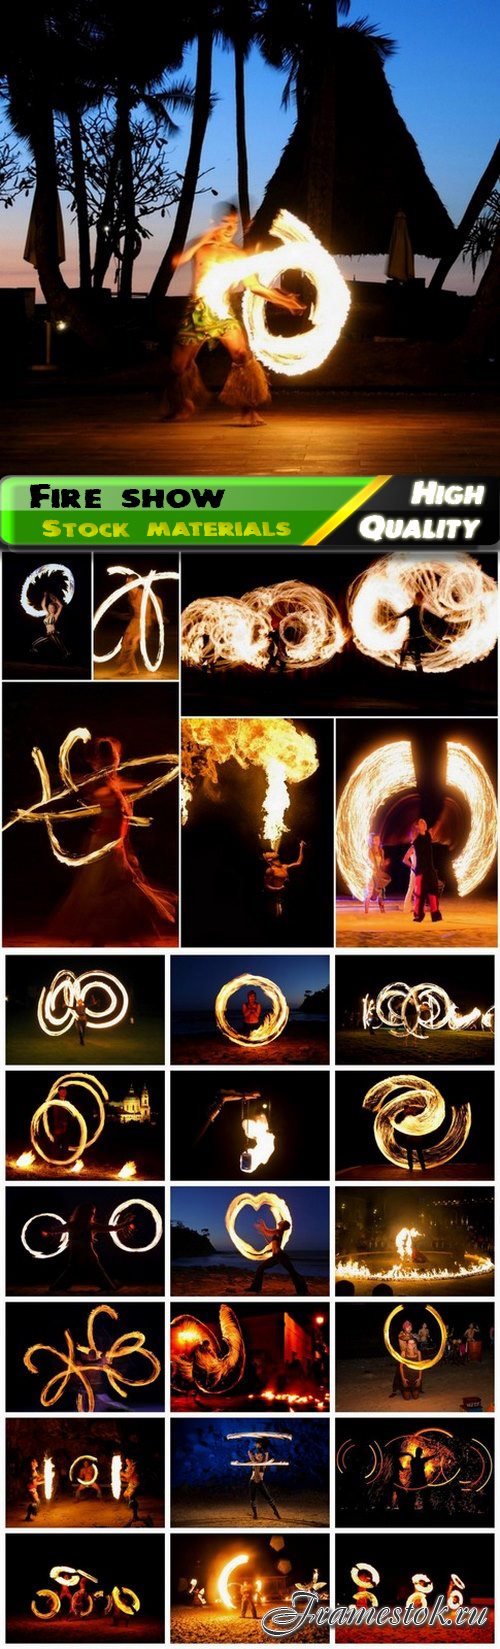 Fire show on beach at night with flame and sparks - 25 HQ Jpg